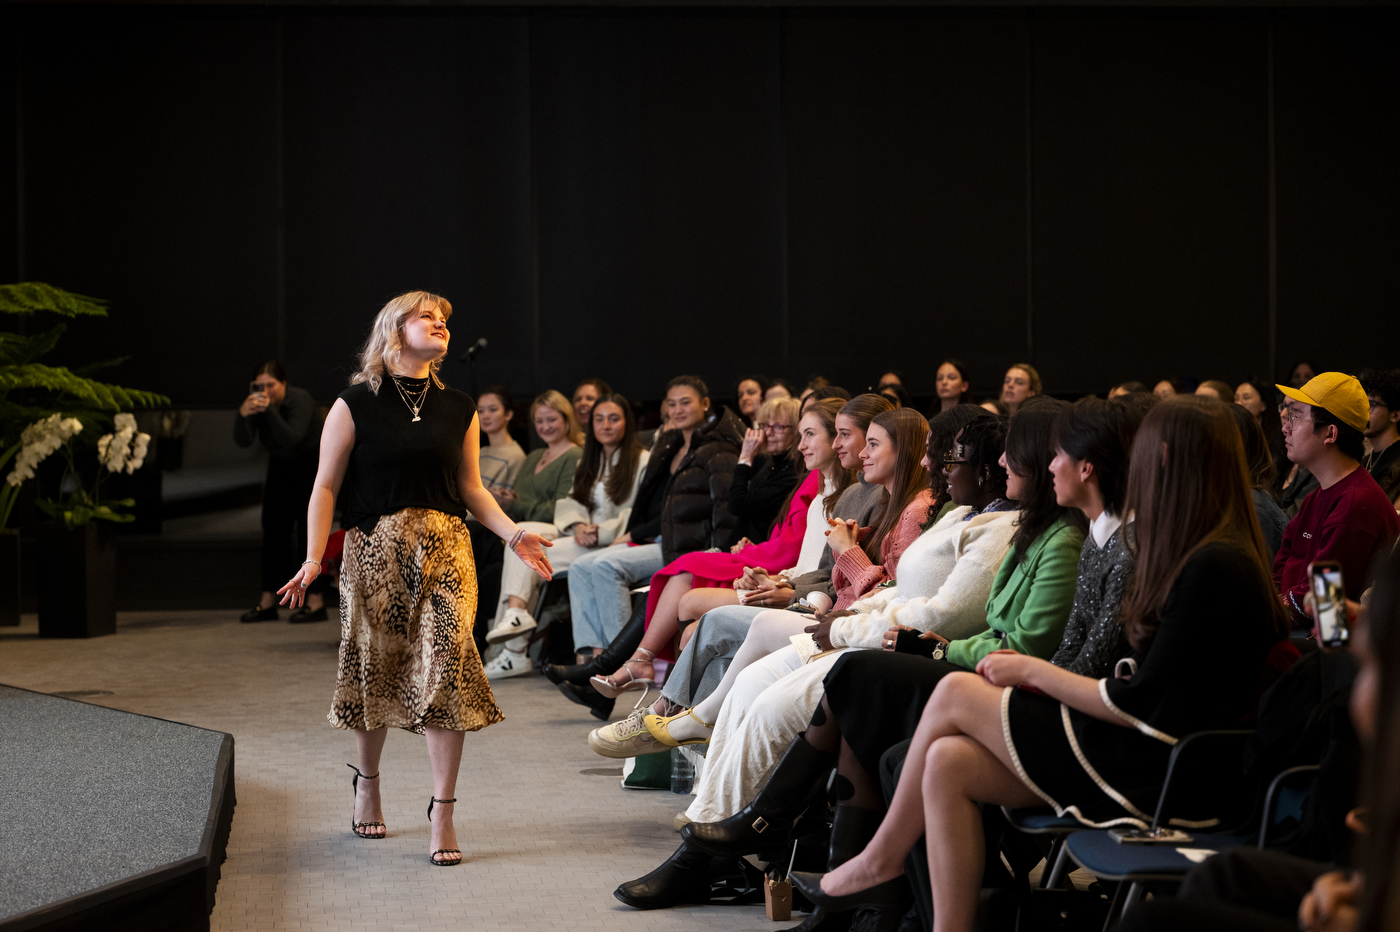 Student modeling a pair of Stuart Weitzman sparkling leopard print heels in front of the audience at the event.